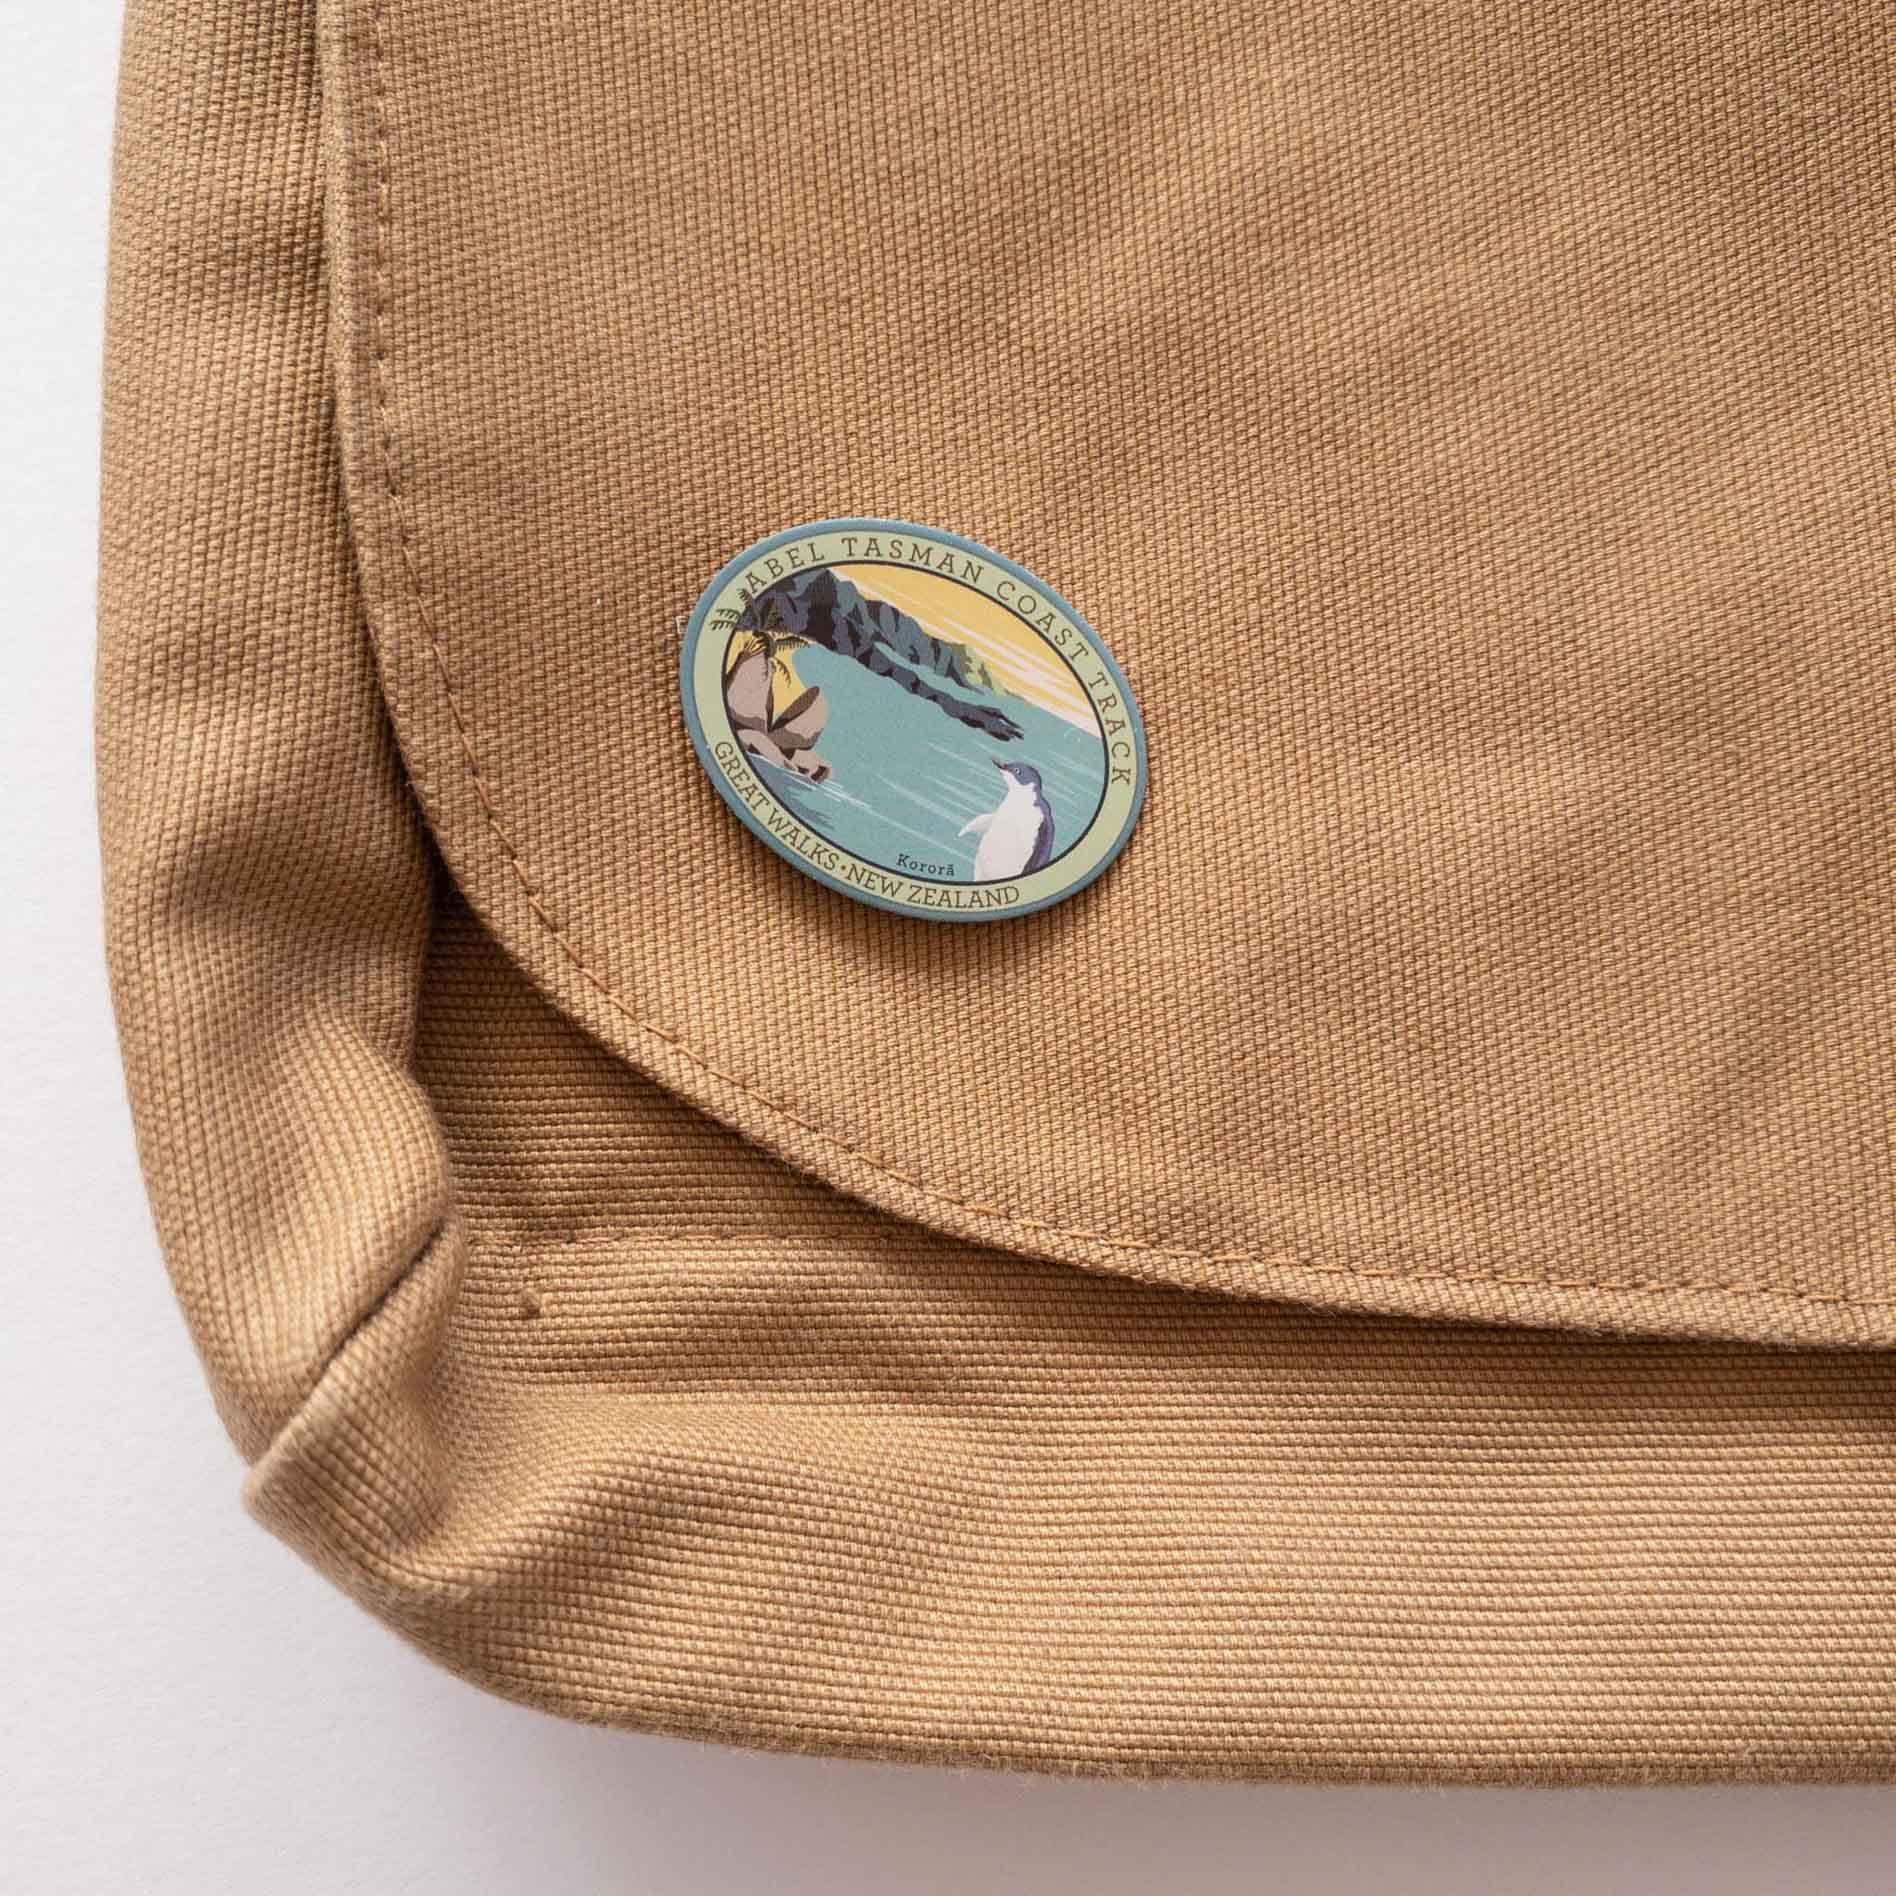 Oval Abel Tasman Coast Track patch, with a little penguin, split apple rock, yellow sky and sandy bays, on a brown canvas bag.